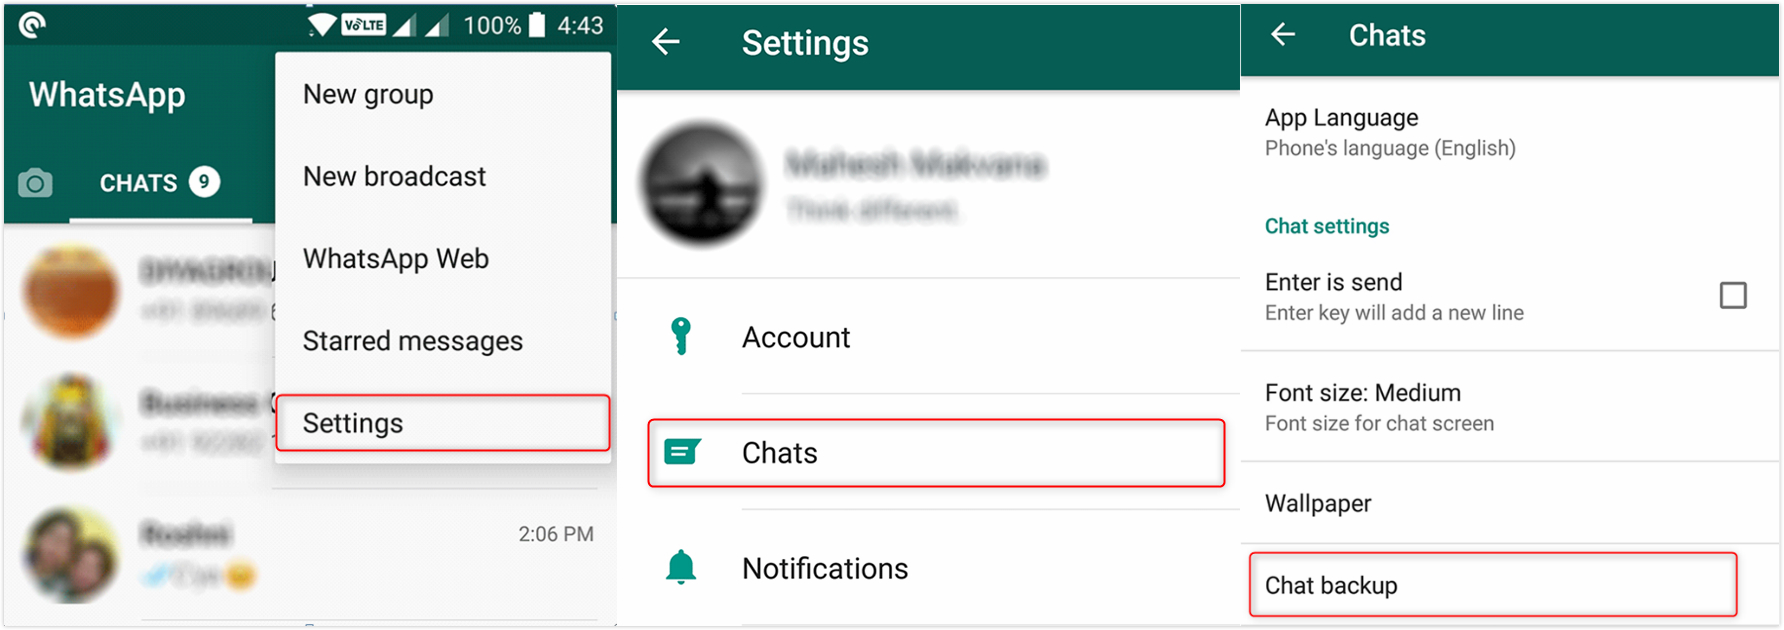 How to Restore WhatsApp Backup from Android to iPhone